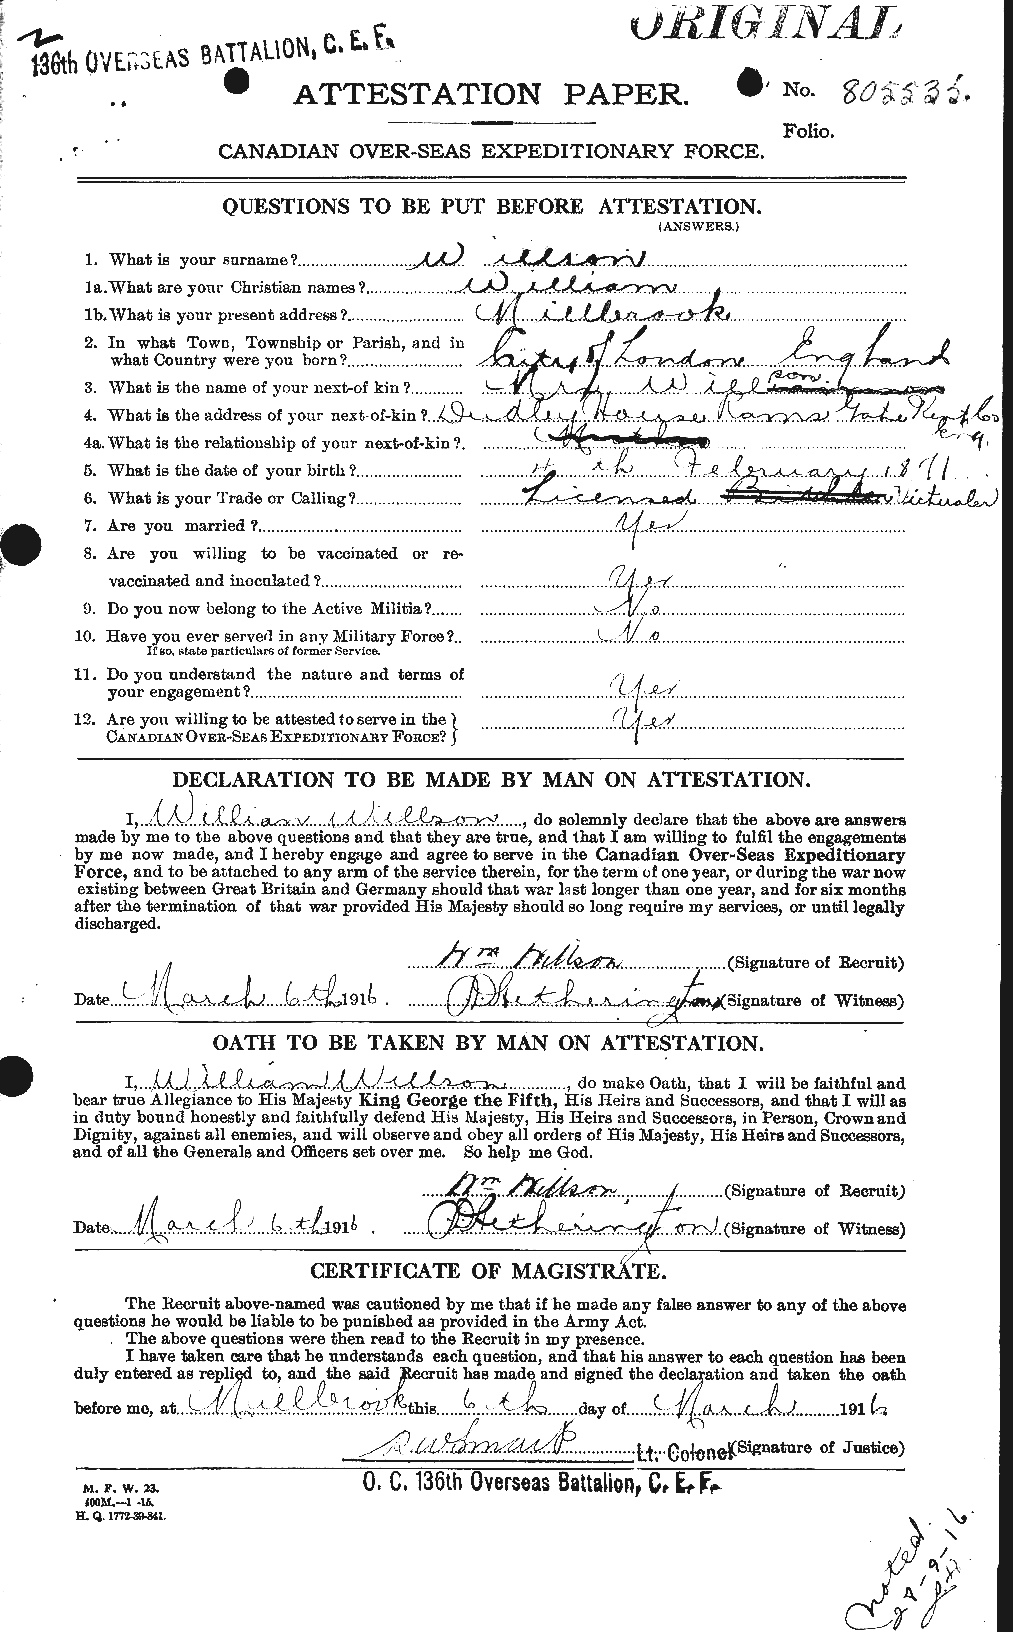 Personnel Records of the First World War - CEF 676998a